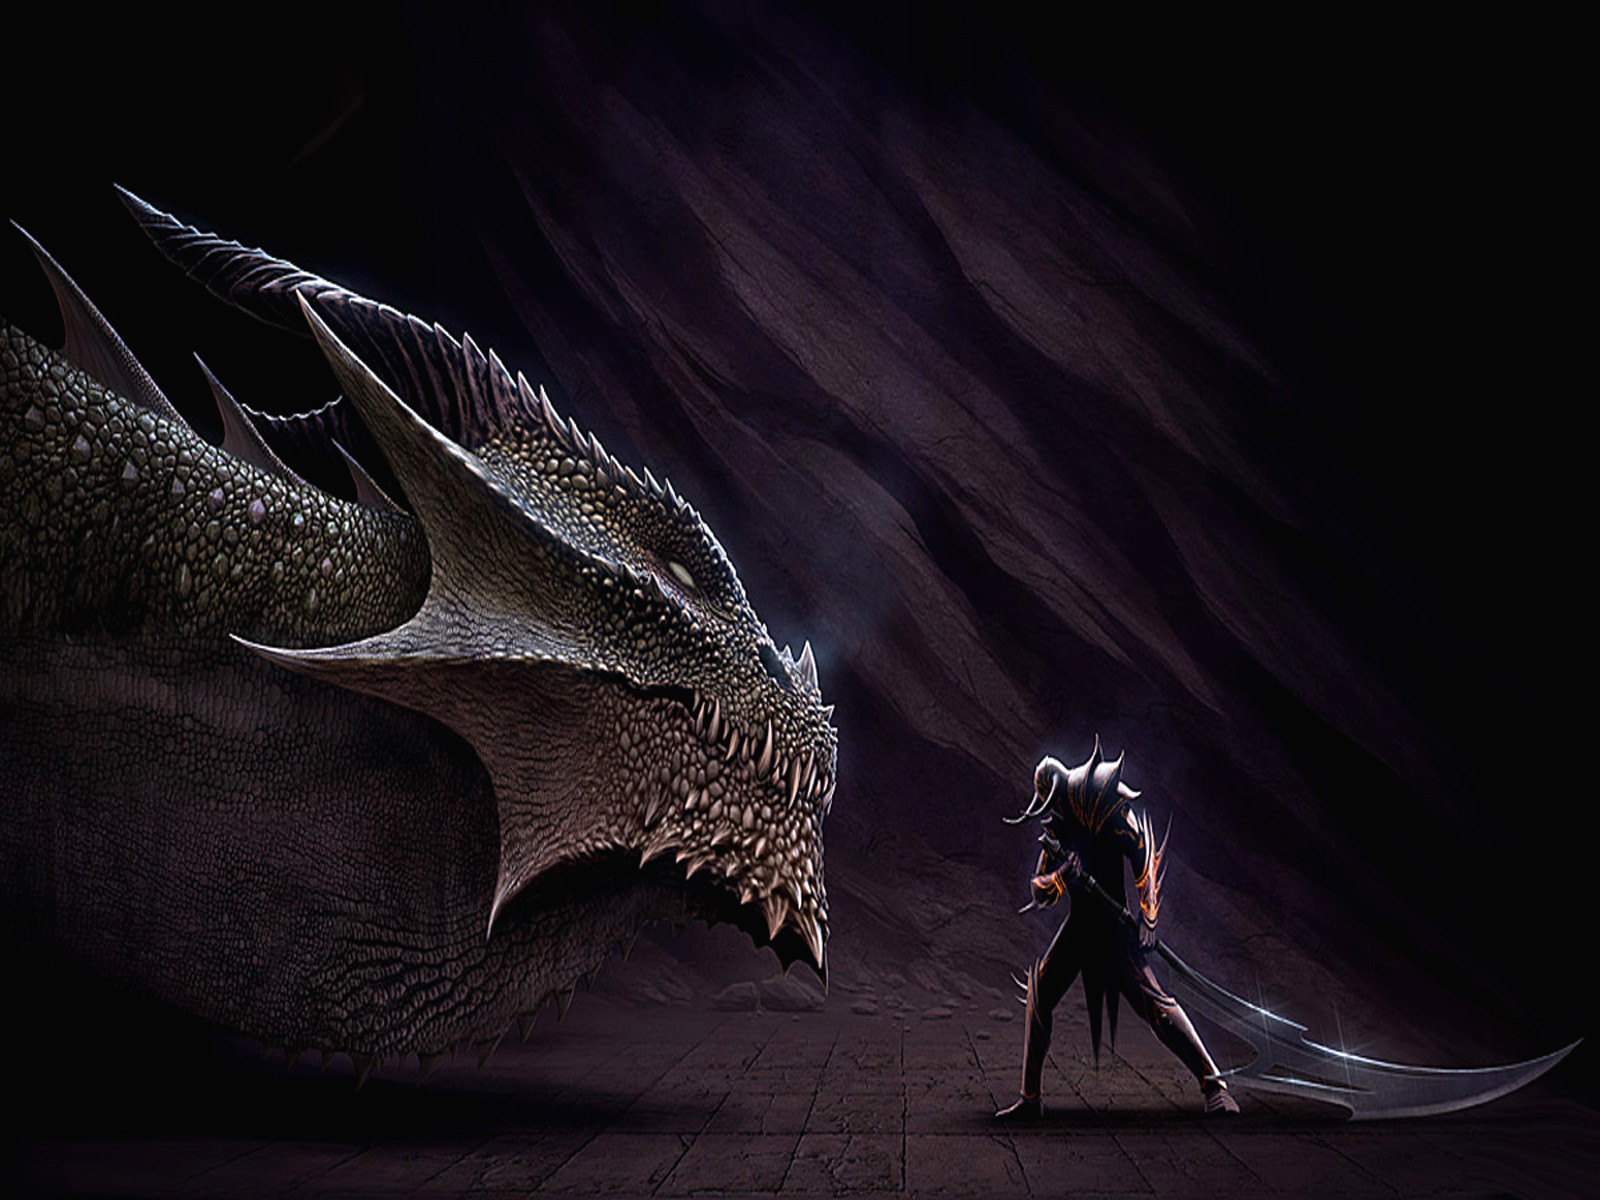 dragones wallpaper hd,dragon,cg artwork,fictional character,darkness,mythical creature